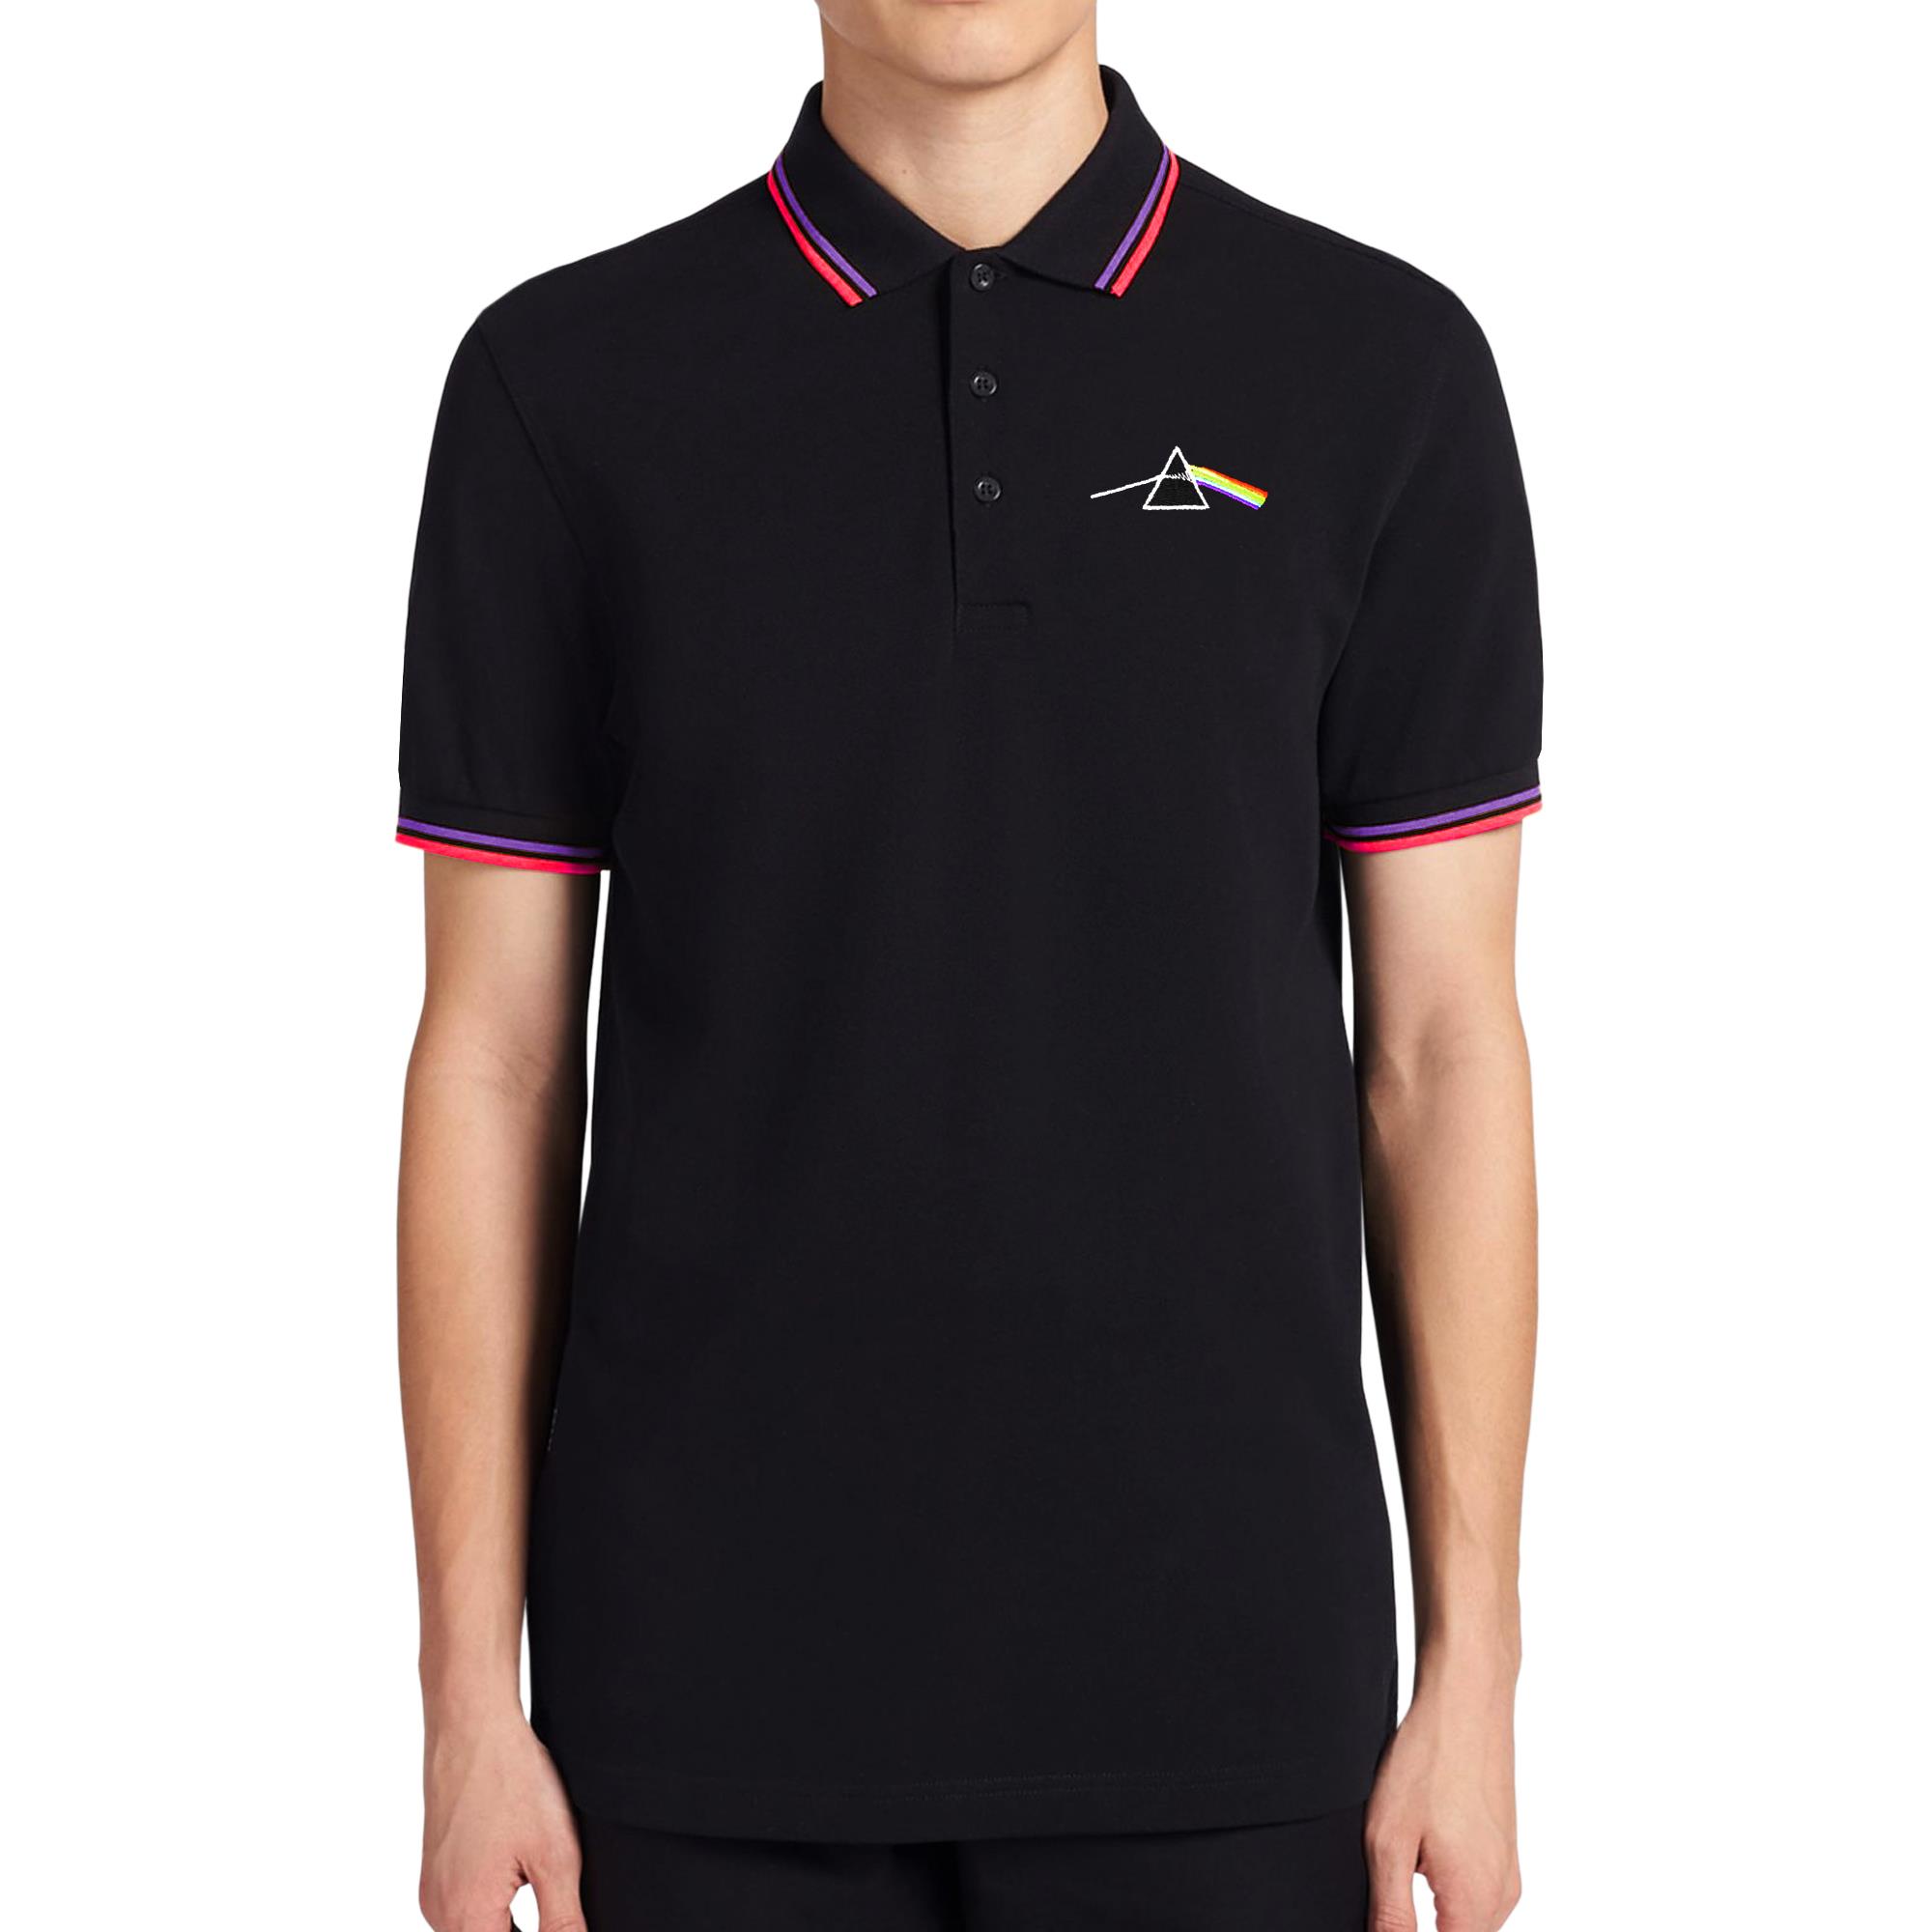 The Dark Side Of The Moon Prism Polo